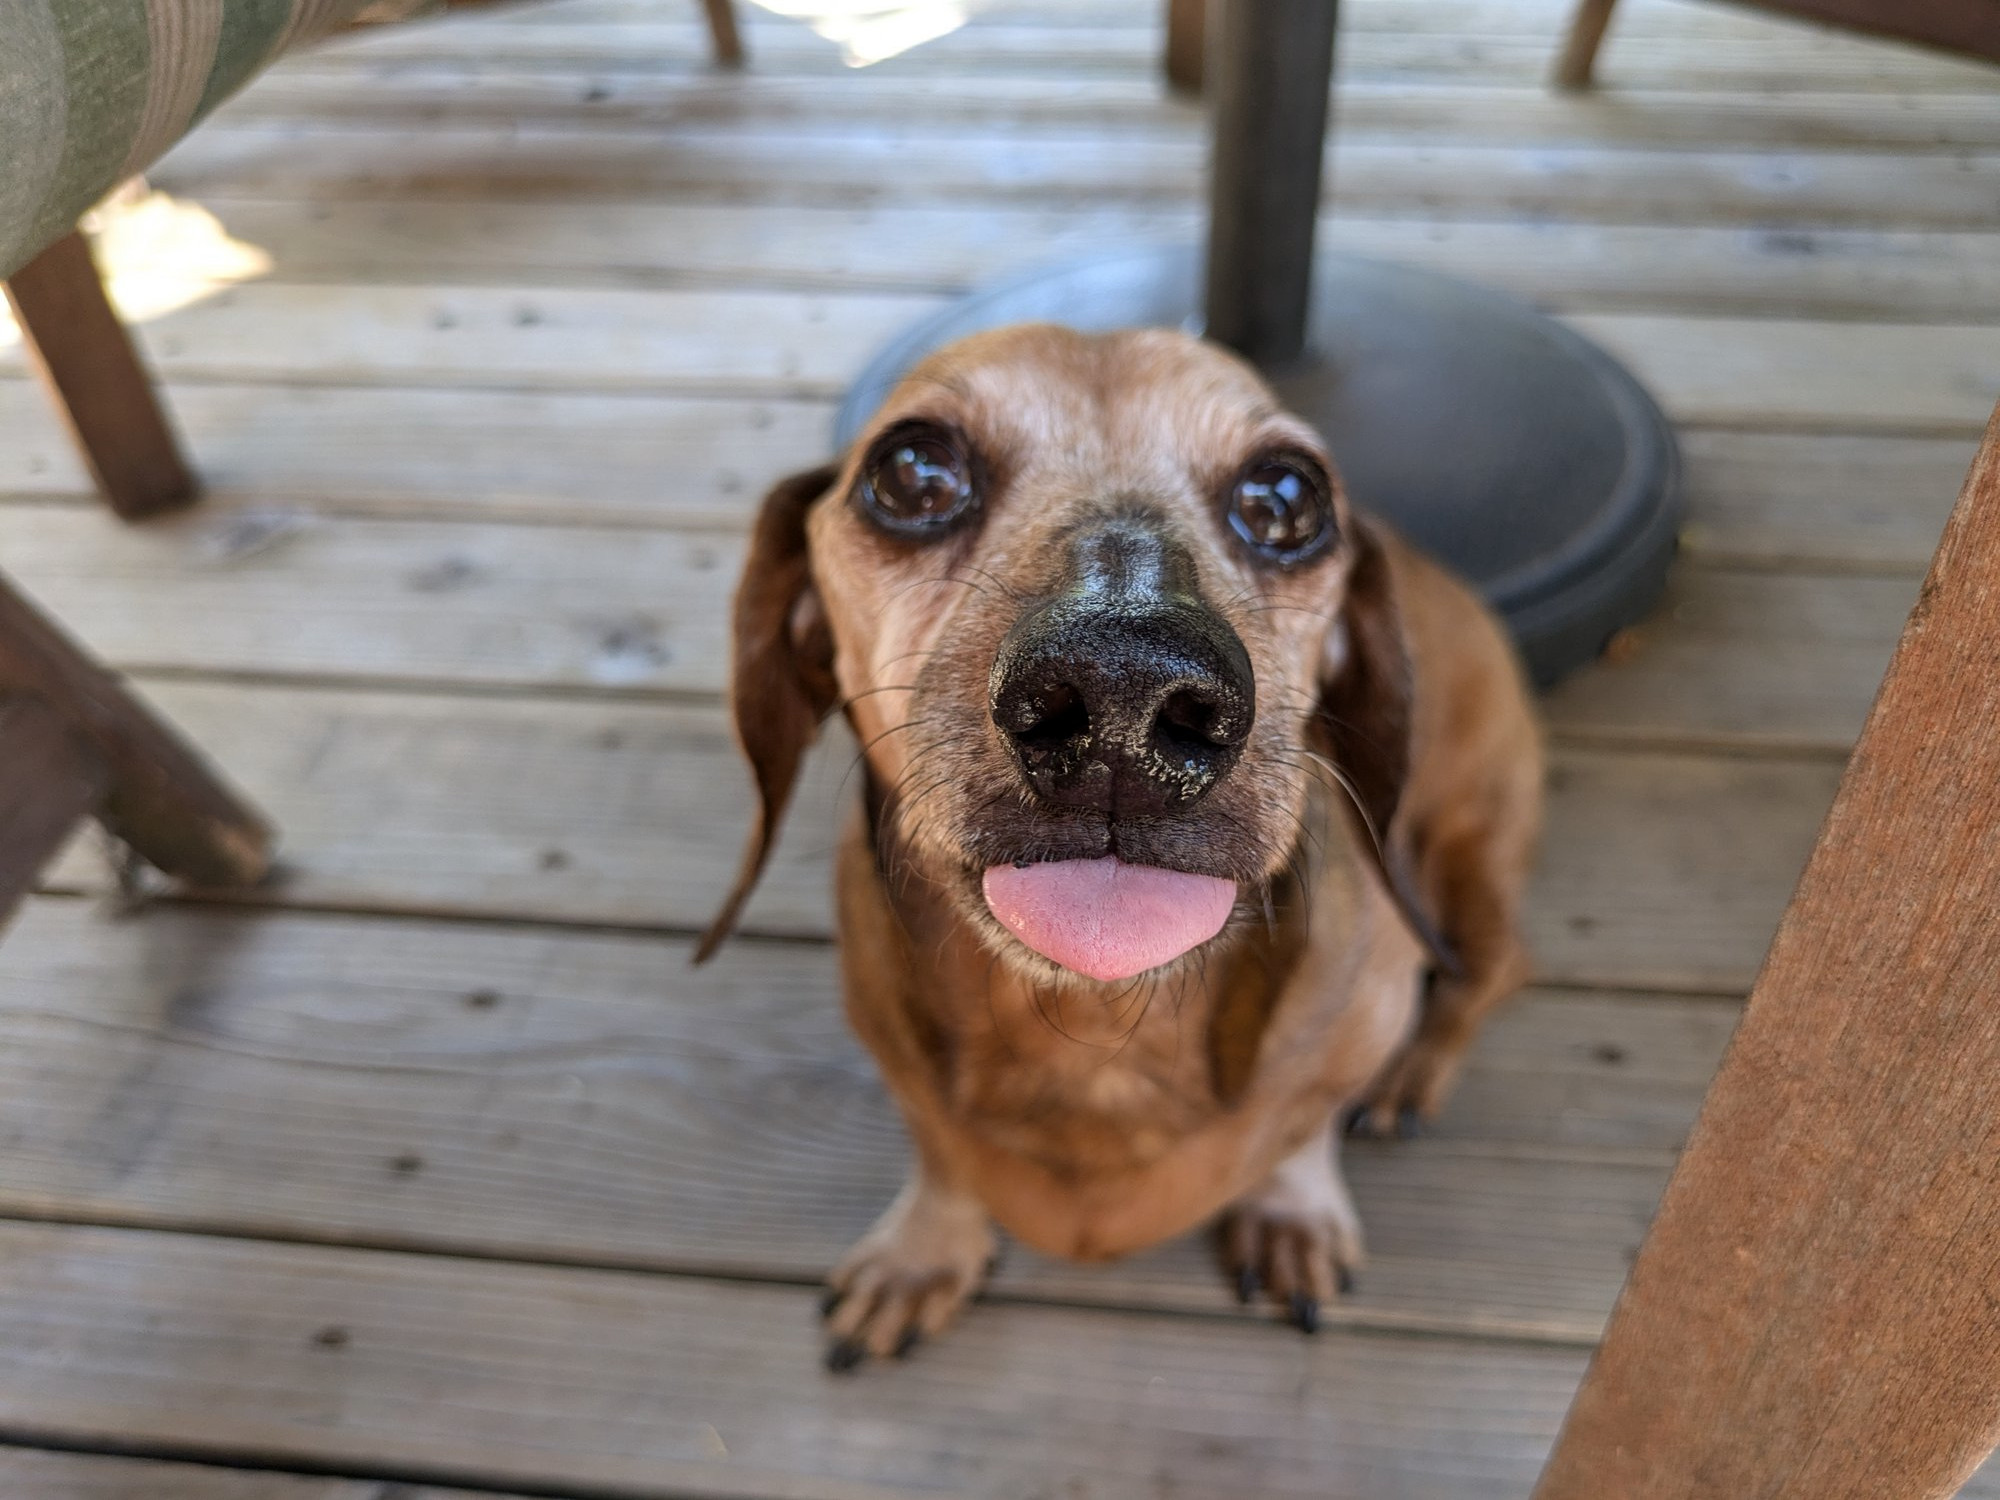 A closeup of a dachshunds face with his tongue sticking out